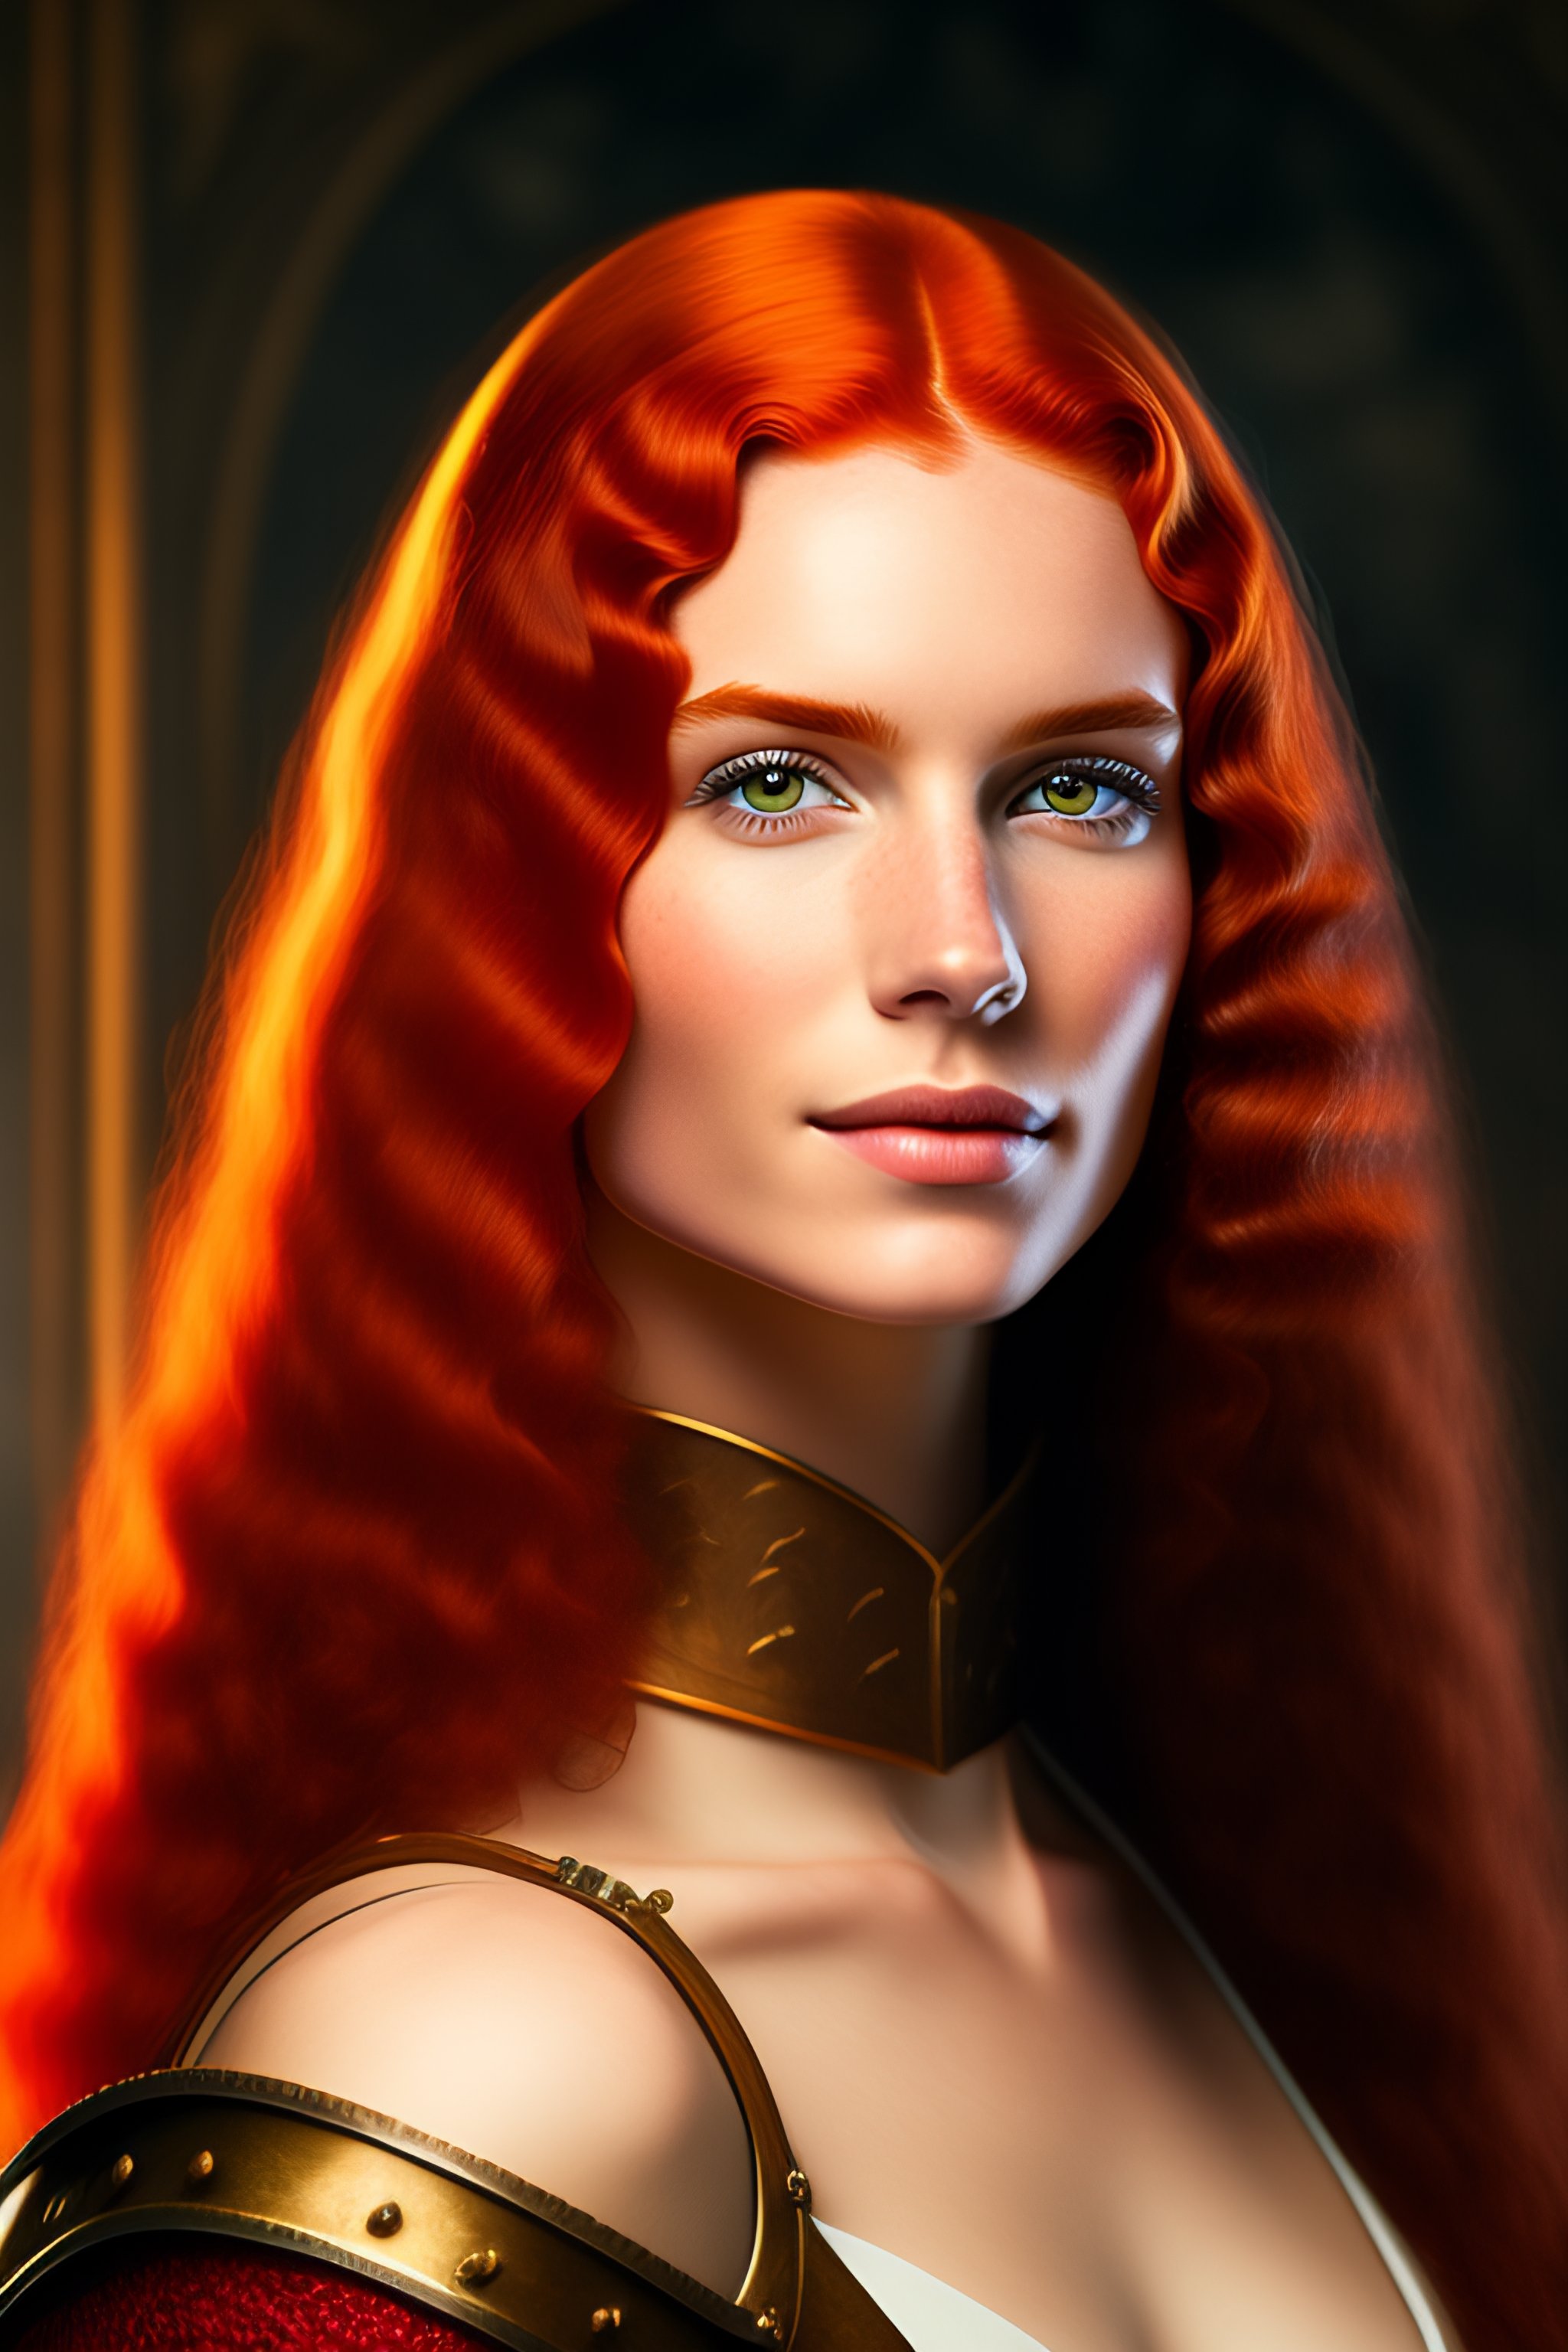 Lexica - Portrait of a knight girl 20 years old red hair